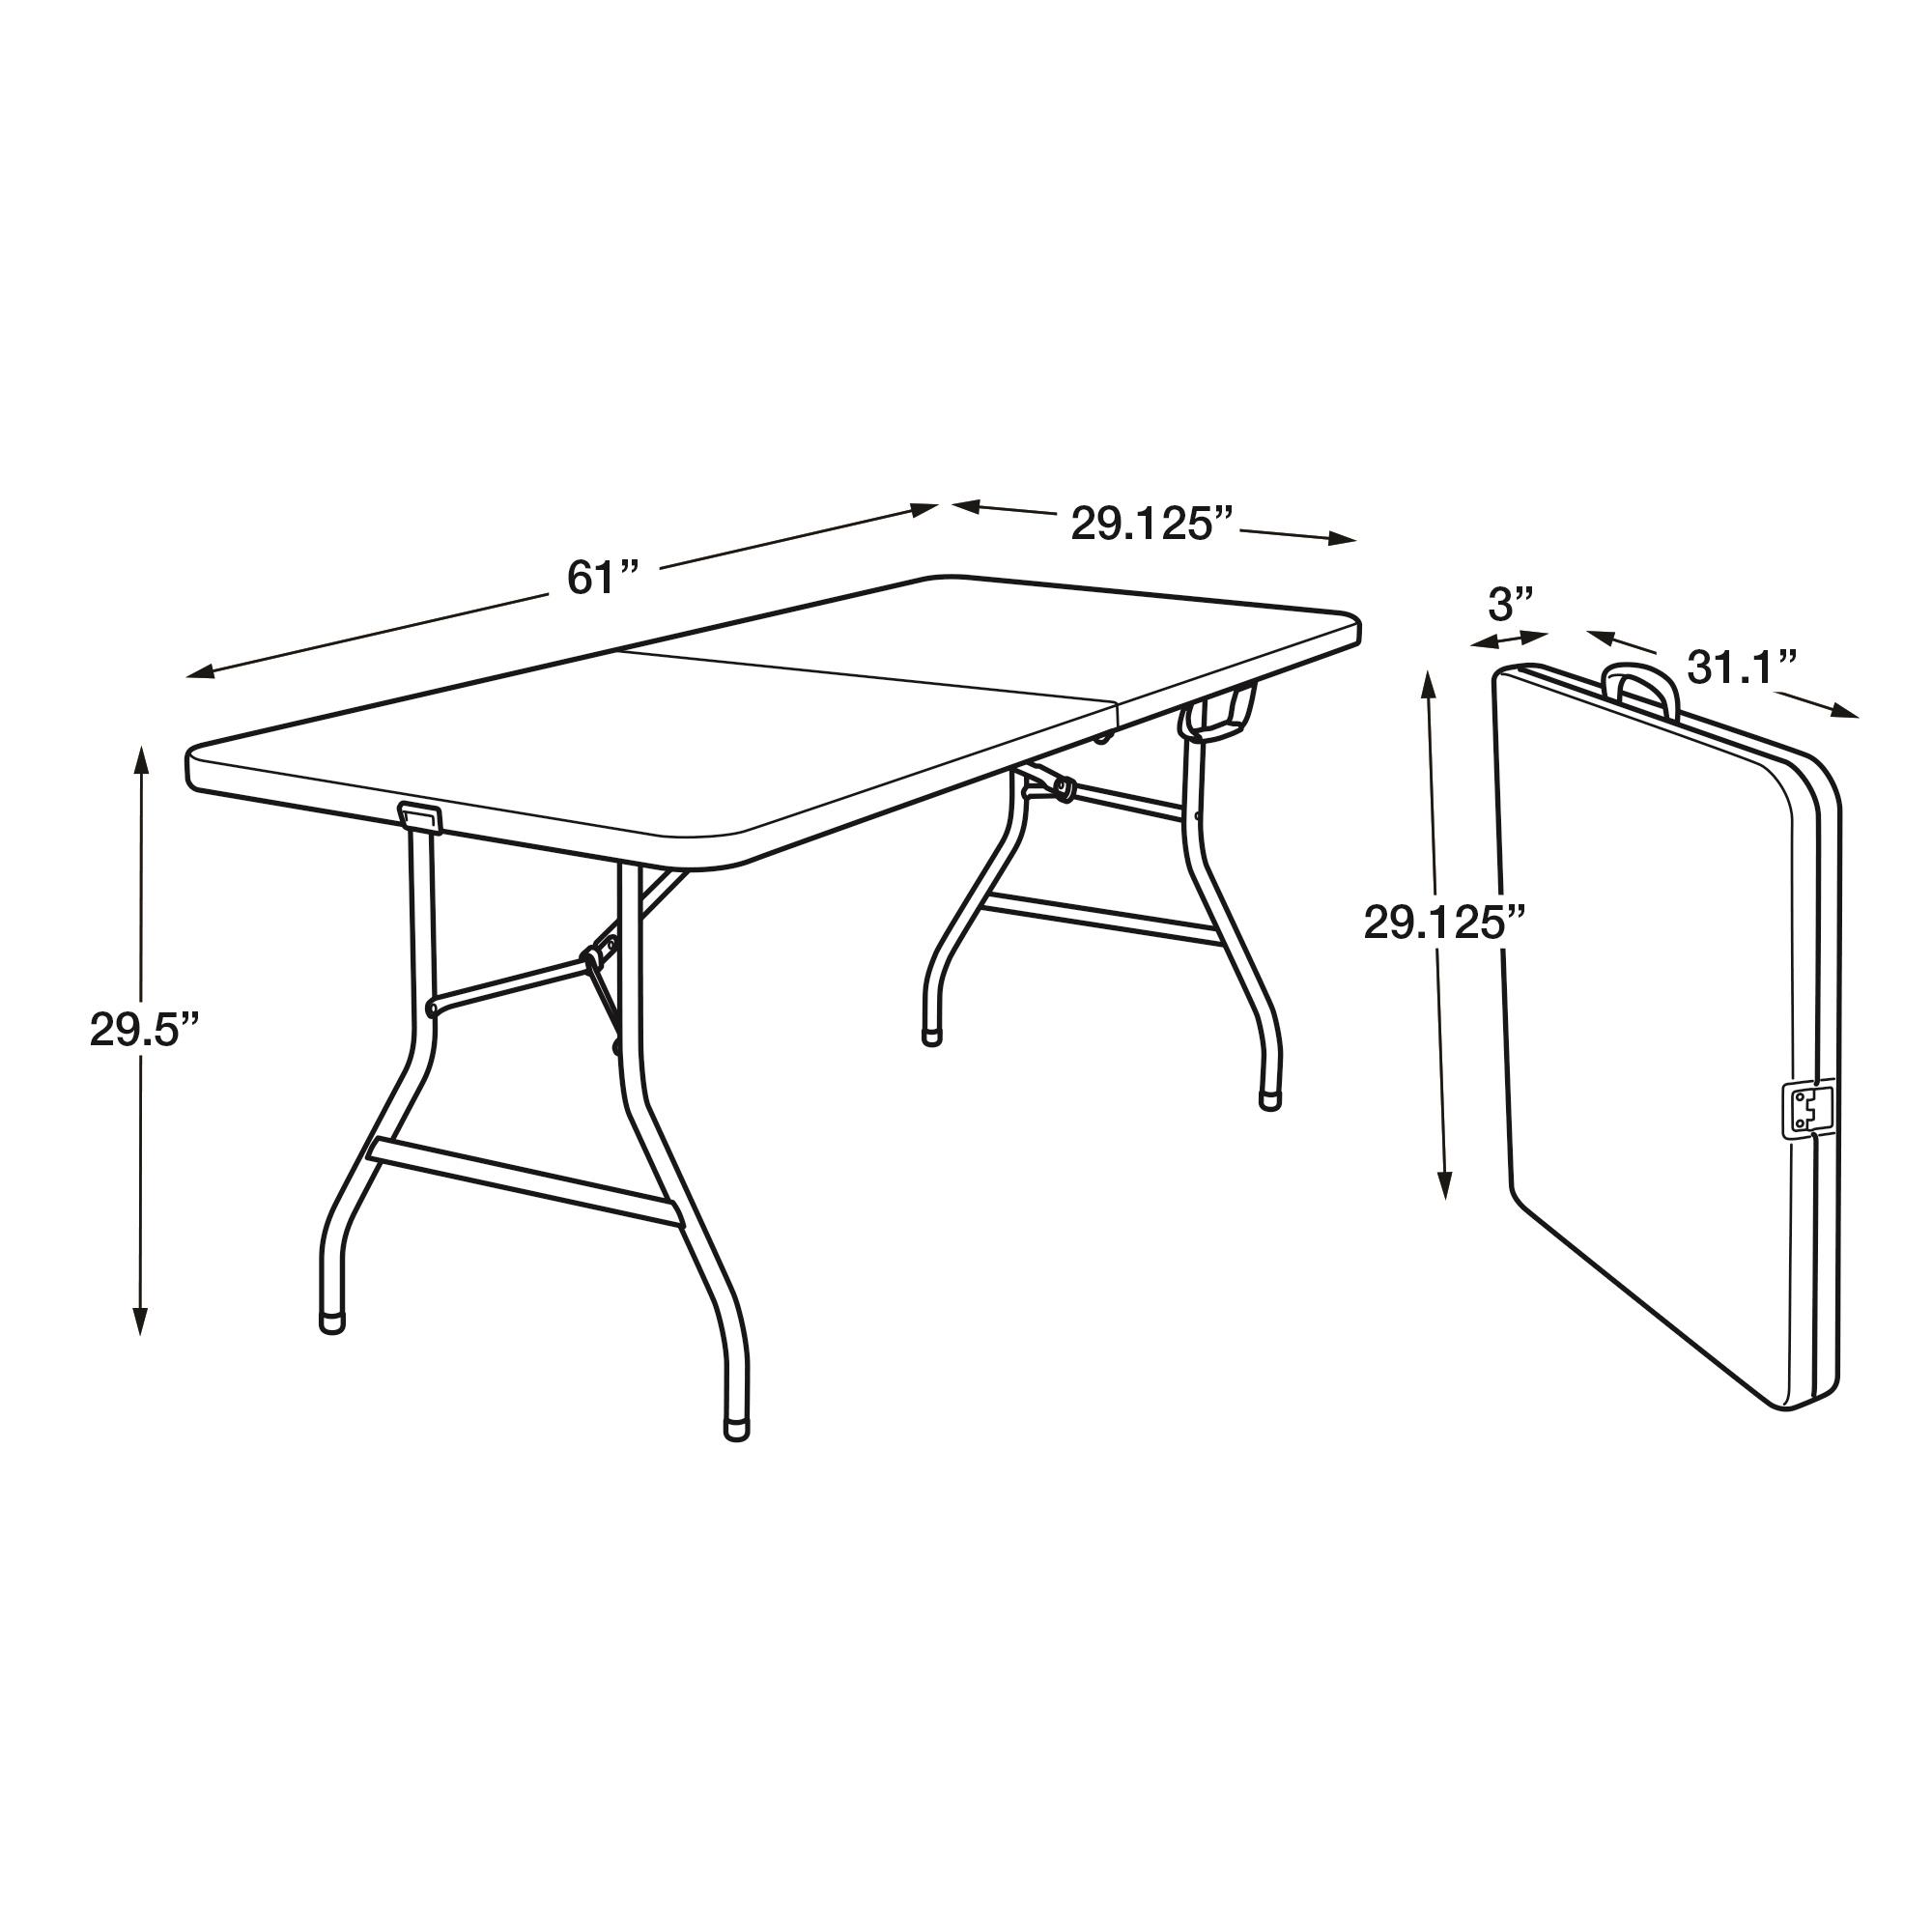 Mainstays 5 Foot Centerfold Folding Table, White - image 3 of 7